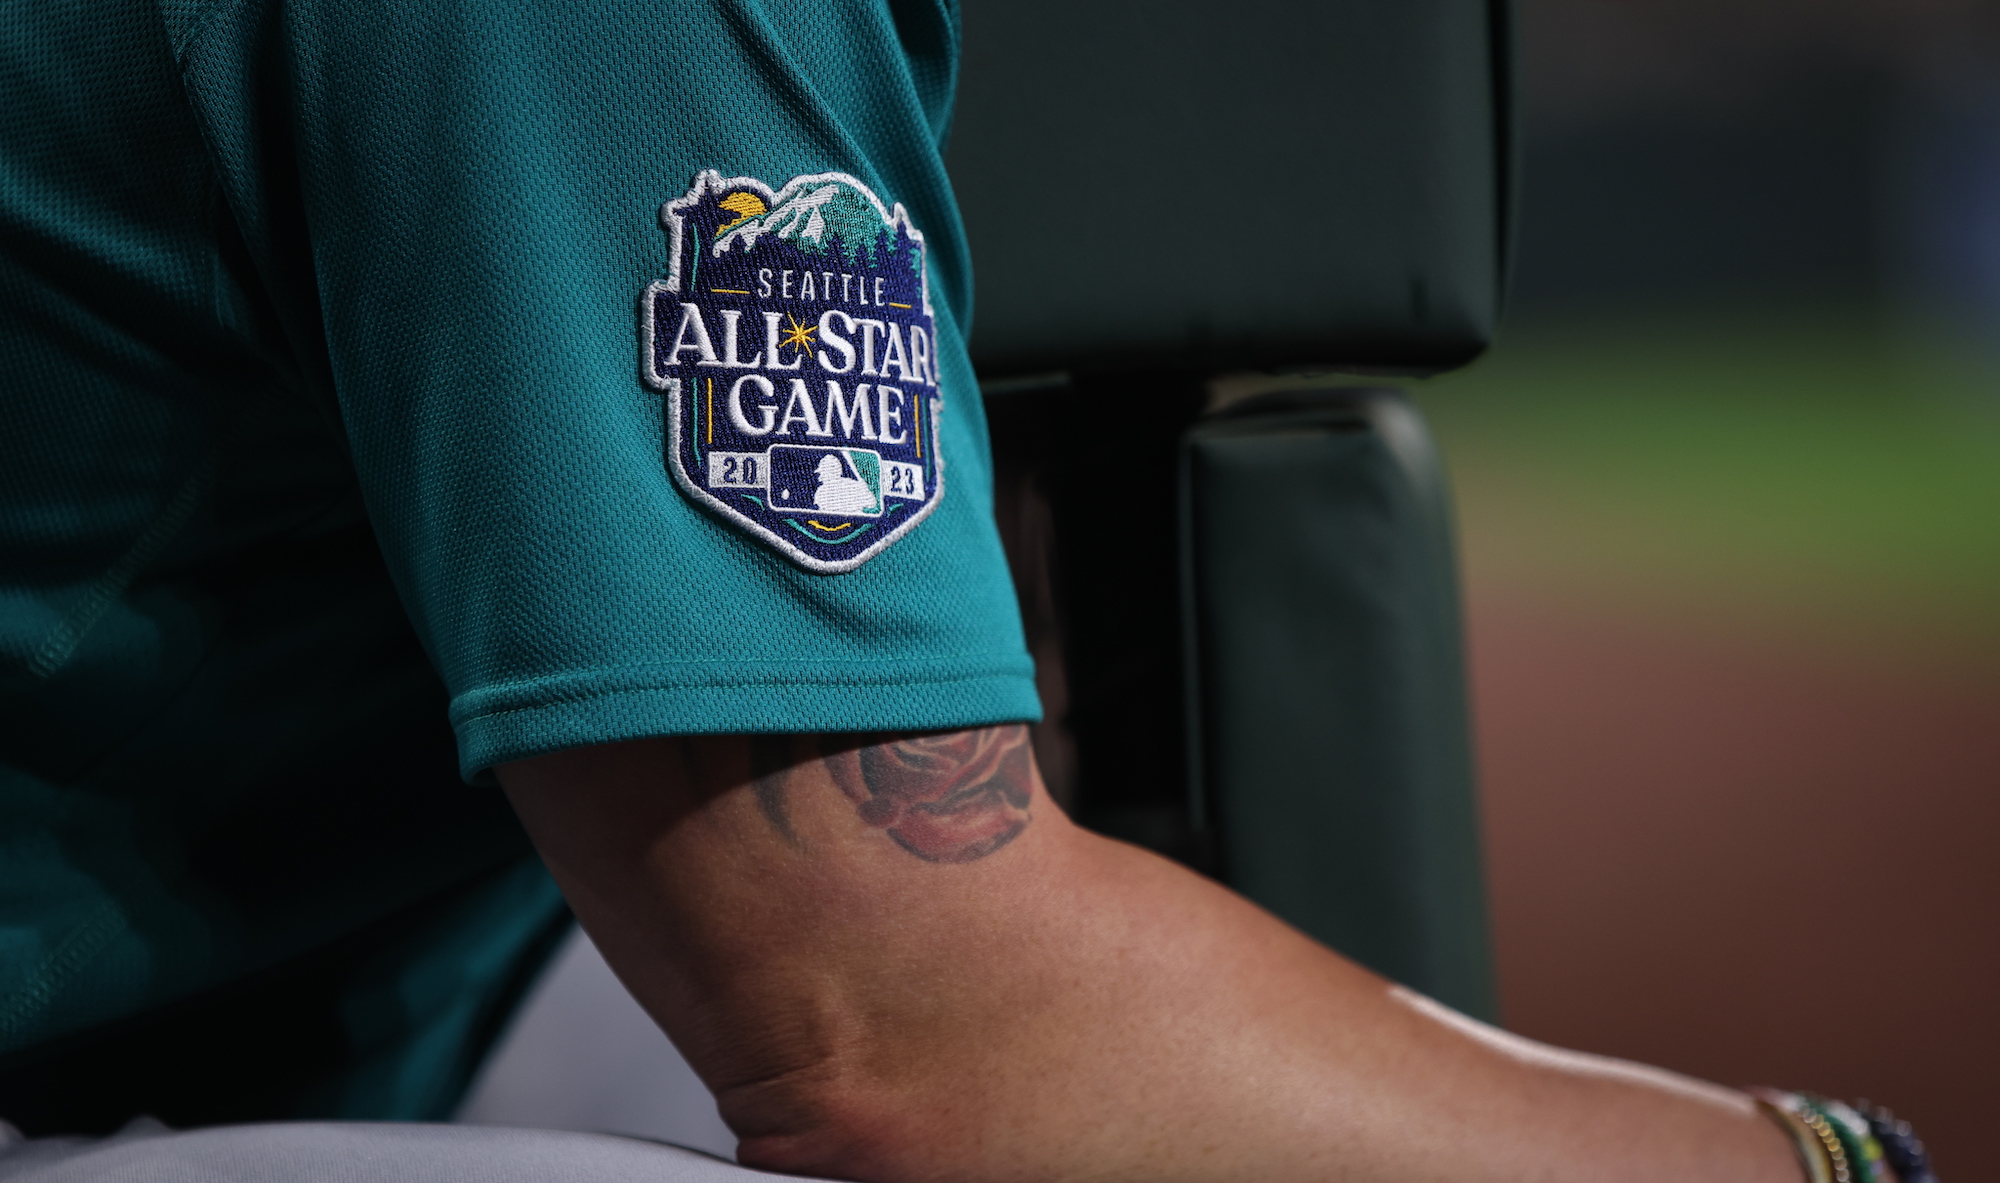 BALTIMORE, MD - JUNE 23: A detail of the MLB All Star Game patch on a Seattle Mariners jersey during the game between the Seattle Mariners and the Baltimore Orioles at Oriole Park at Camden Yards on Friday, June 23, 2023 in Baltimore, Maryland. (Photo by Rob Tringali/MLB Photos via Getty Images)